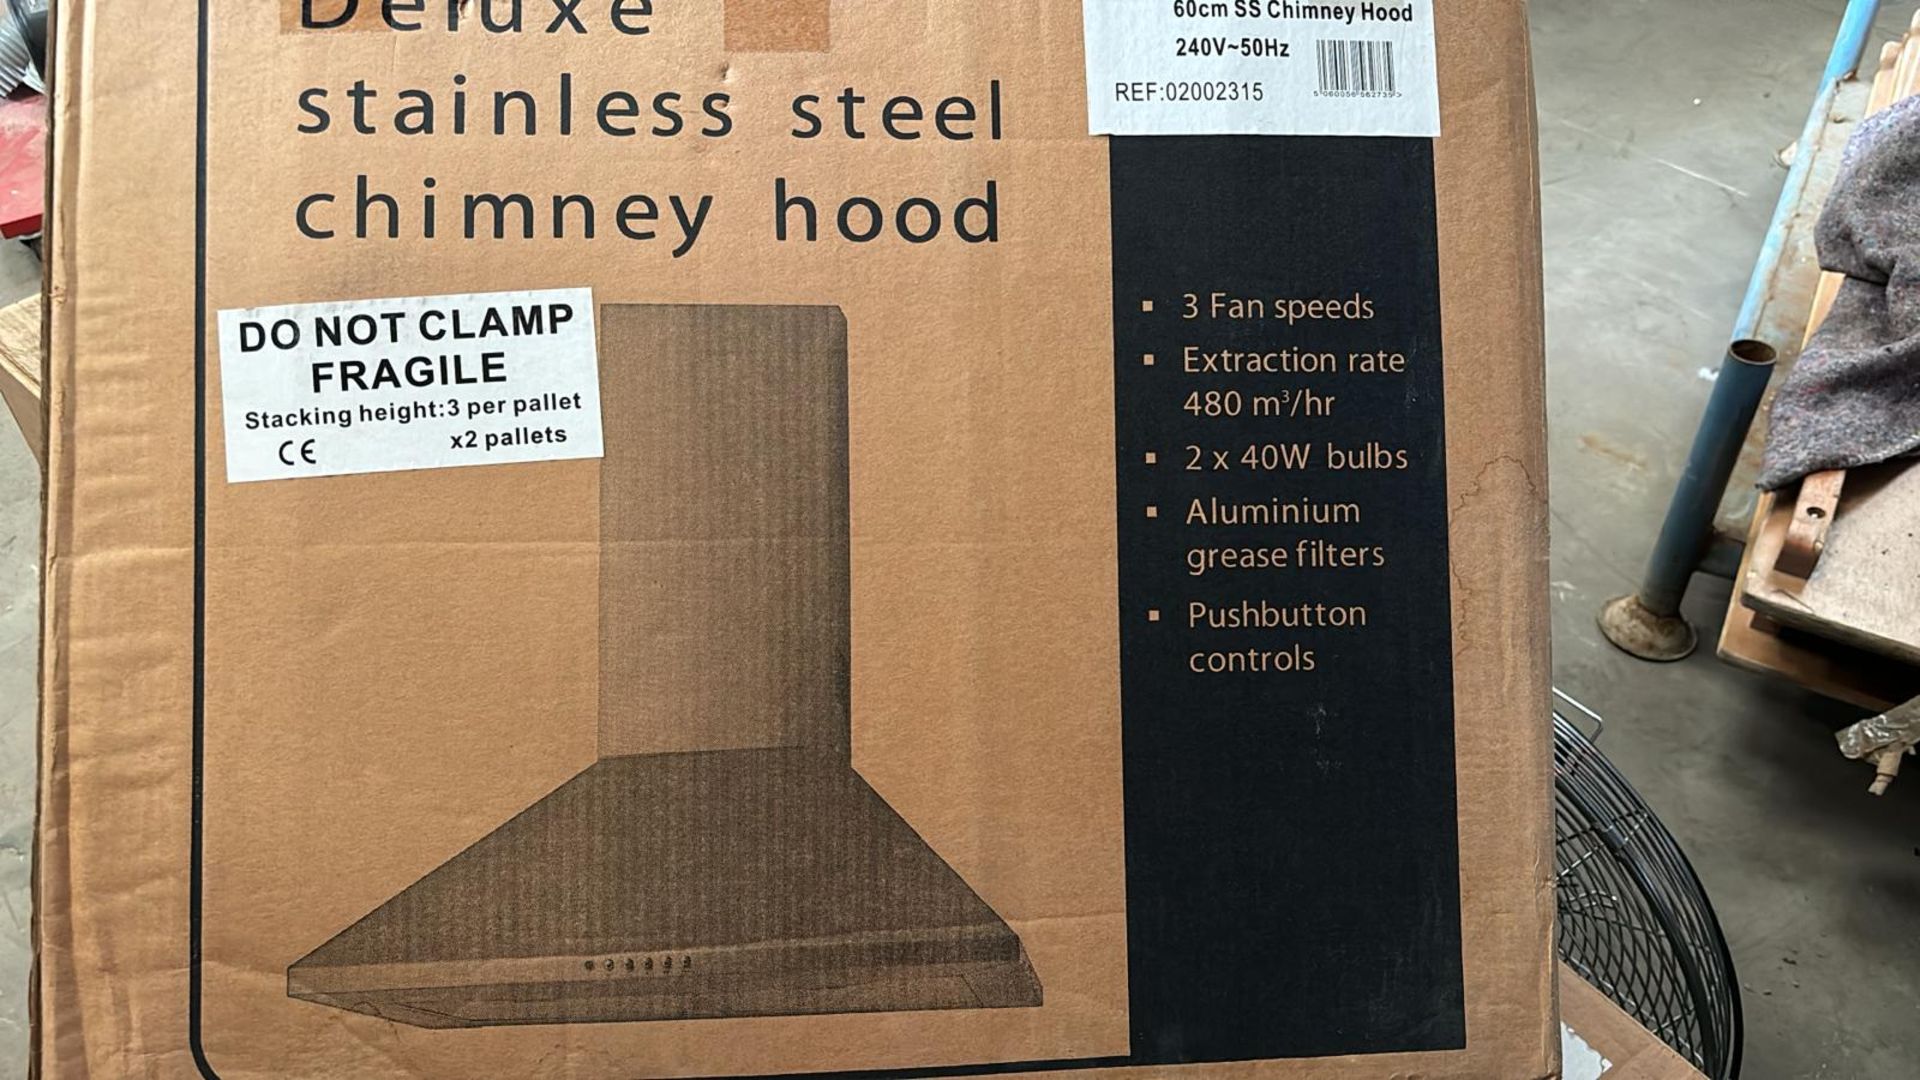 Brand New Boxed HDC60SS deluxe 60cm Chimney Hood RRP £179 - Image 2 of 2